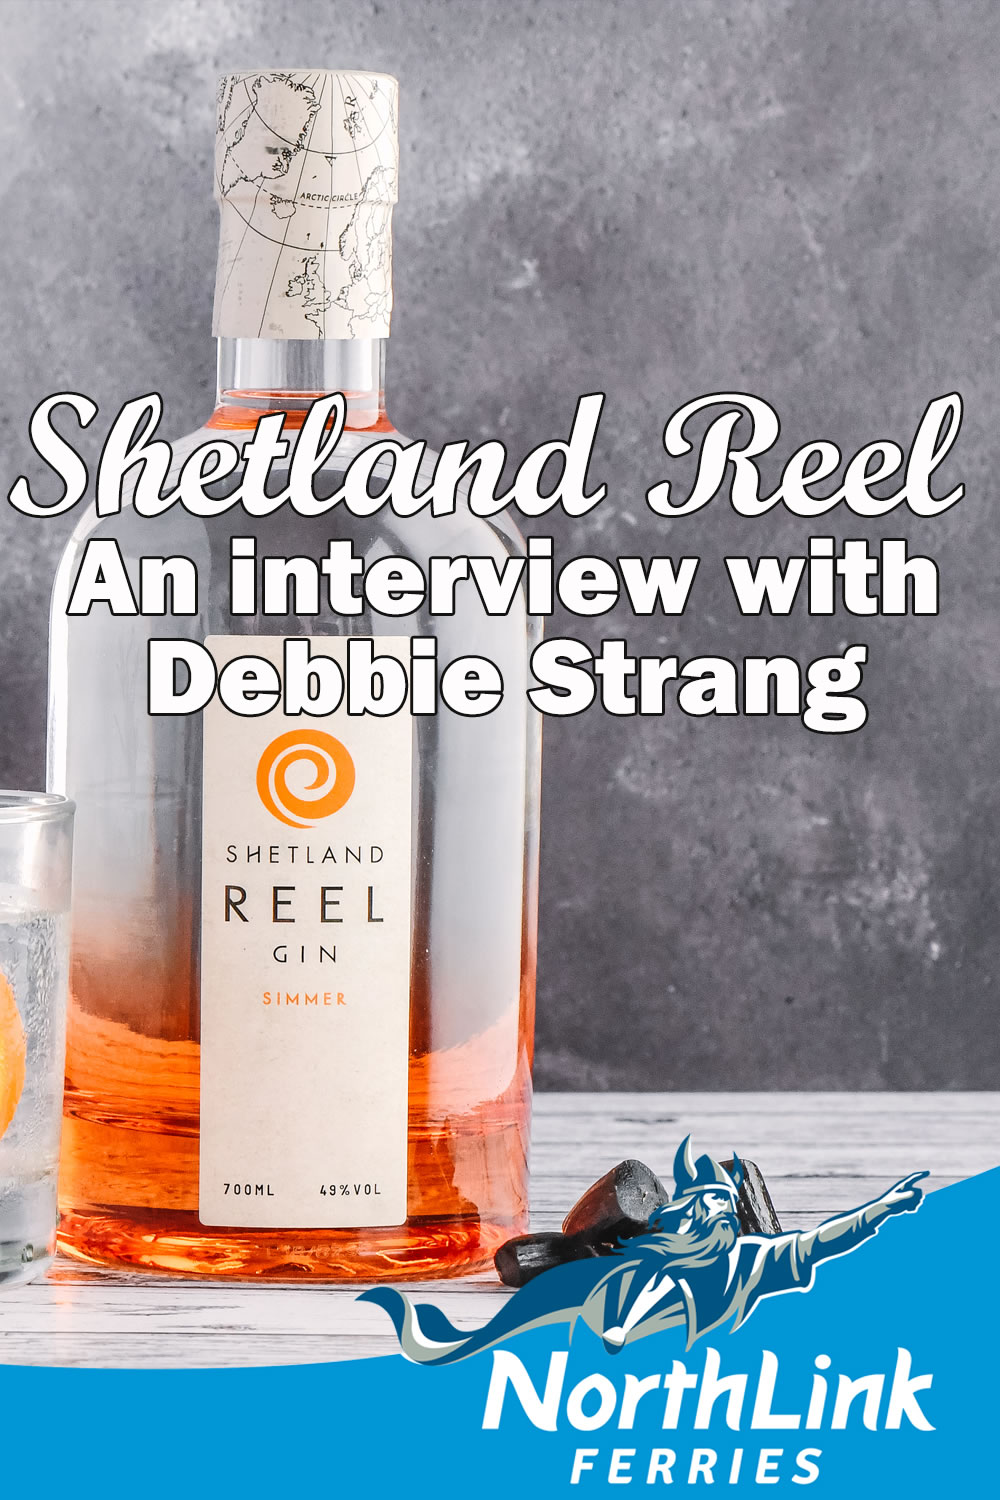 Shetland Reel - an interview with Debbie Strang